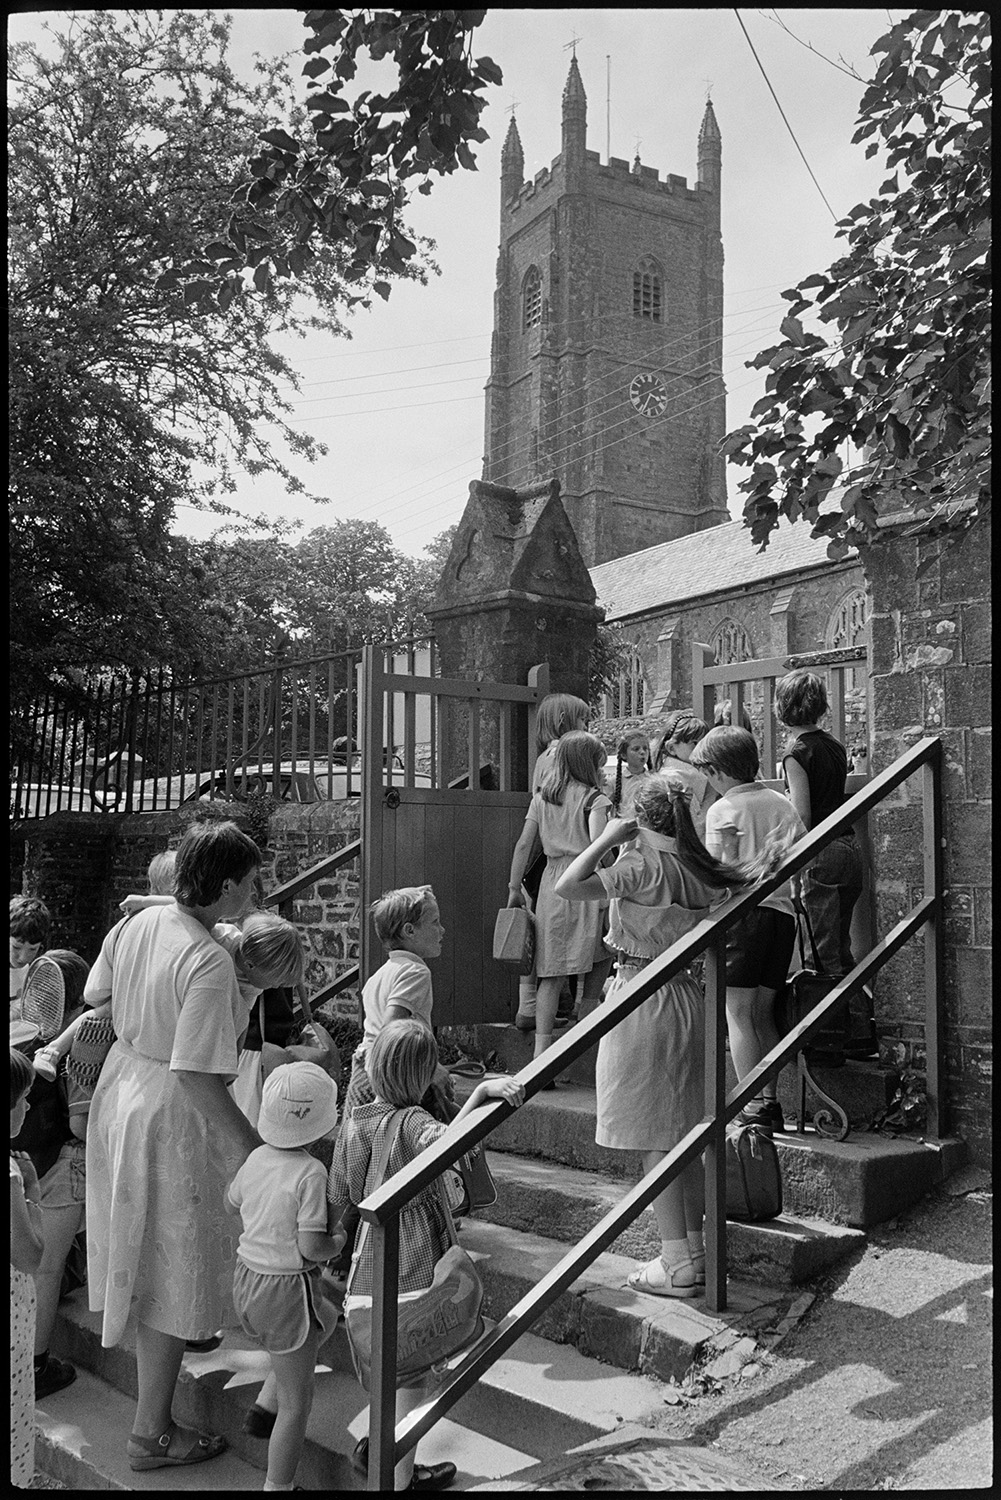 Primary school. Children in playground and at school gates Church tower in background.
[A mother carrying a young child and a group of children walking up the steps to the gate at Chulmleigh Primary School. Chulmleigh church tower can be seen in the background.]